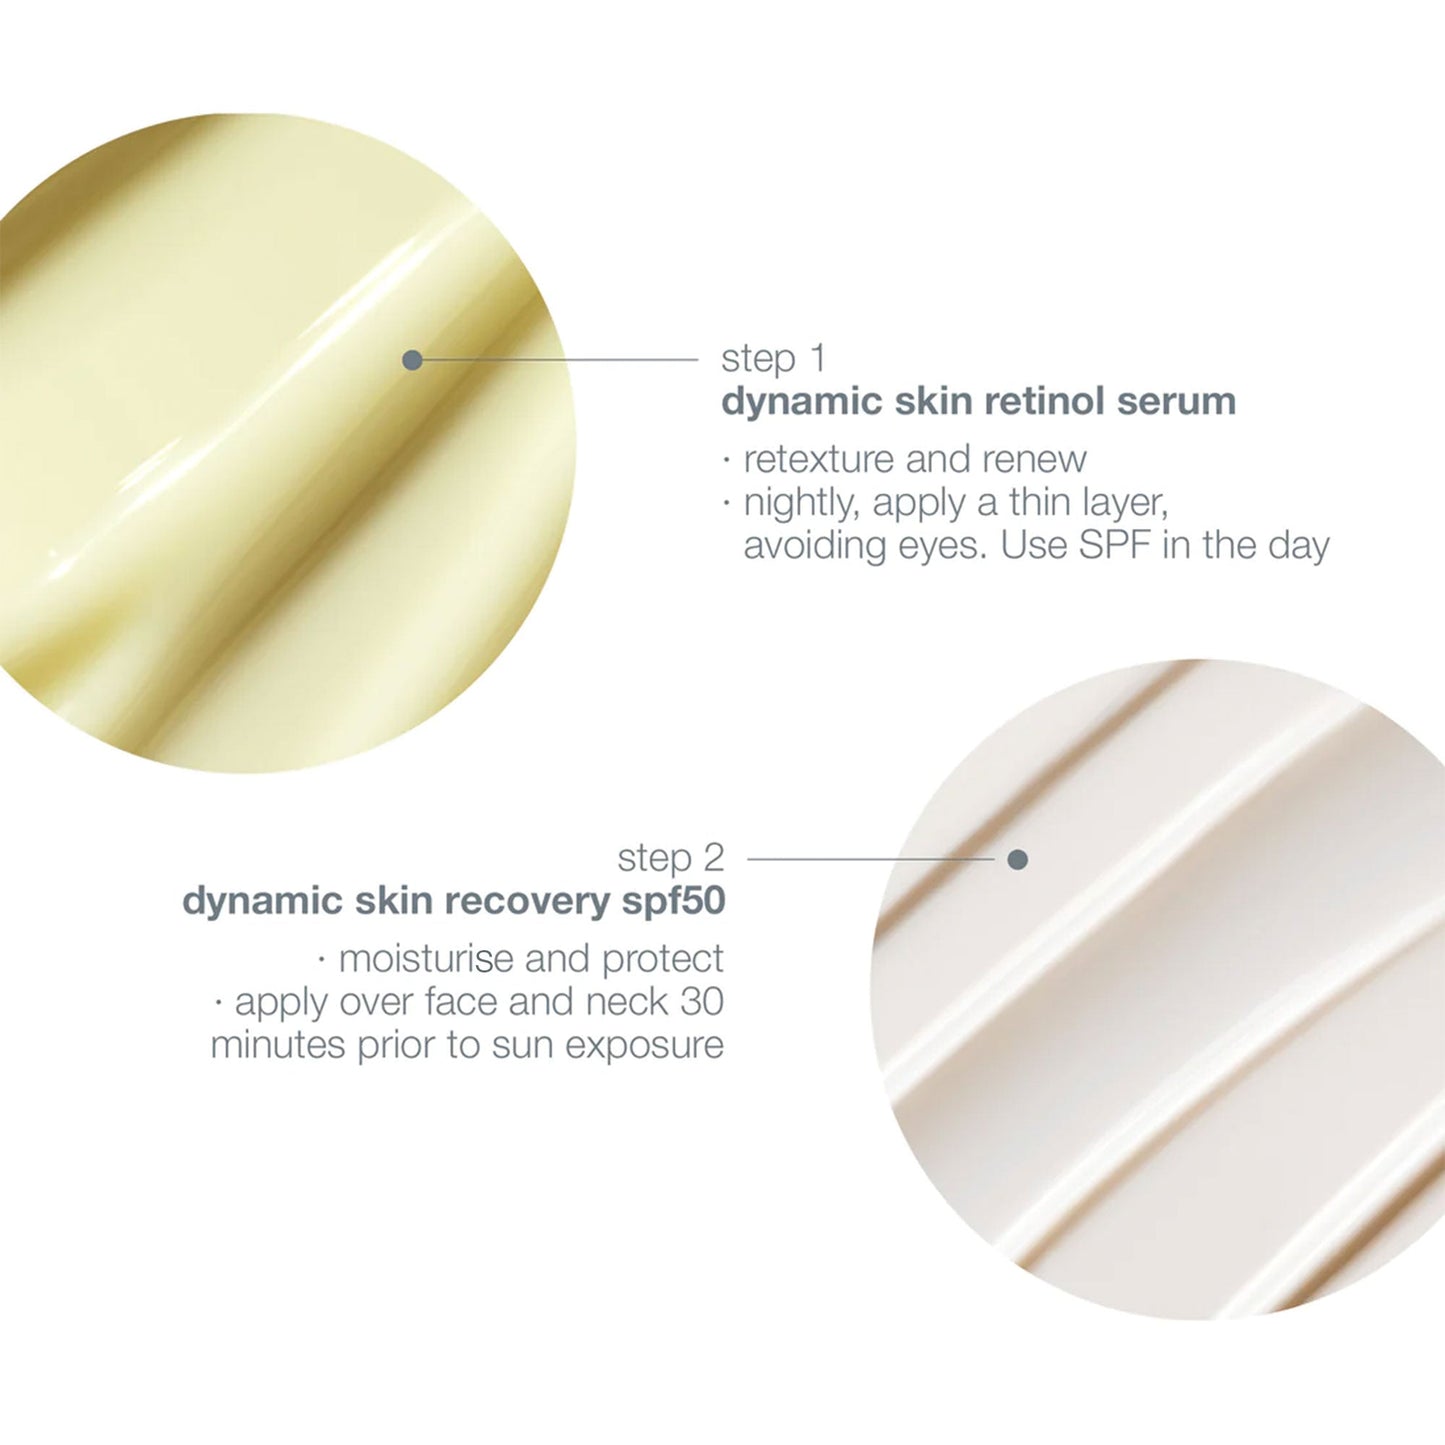 Dynamic Skin Recovery SPF50 Duo (1 full size + 1 free travel) (8572025667914)